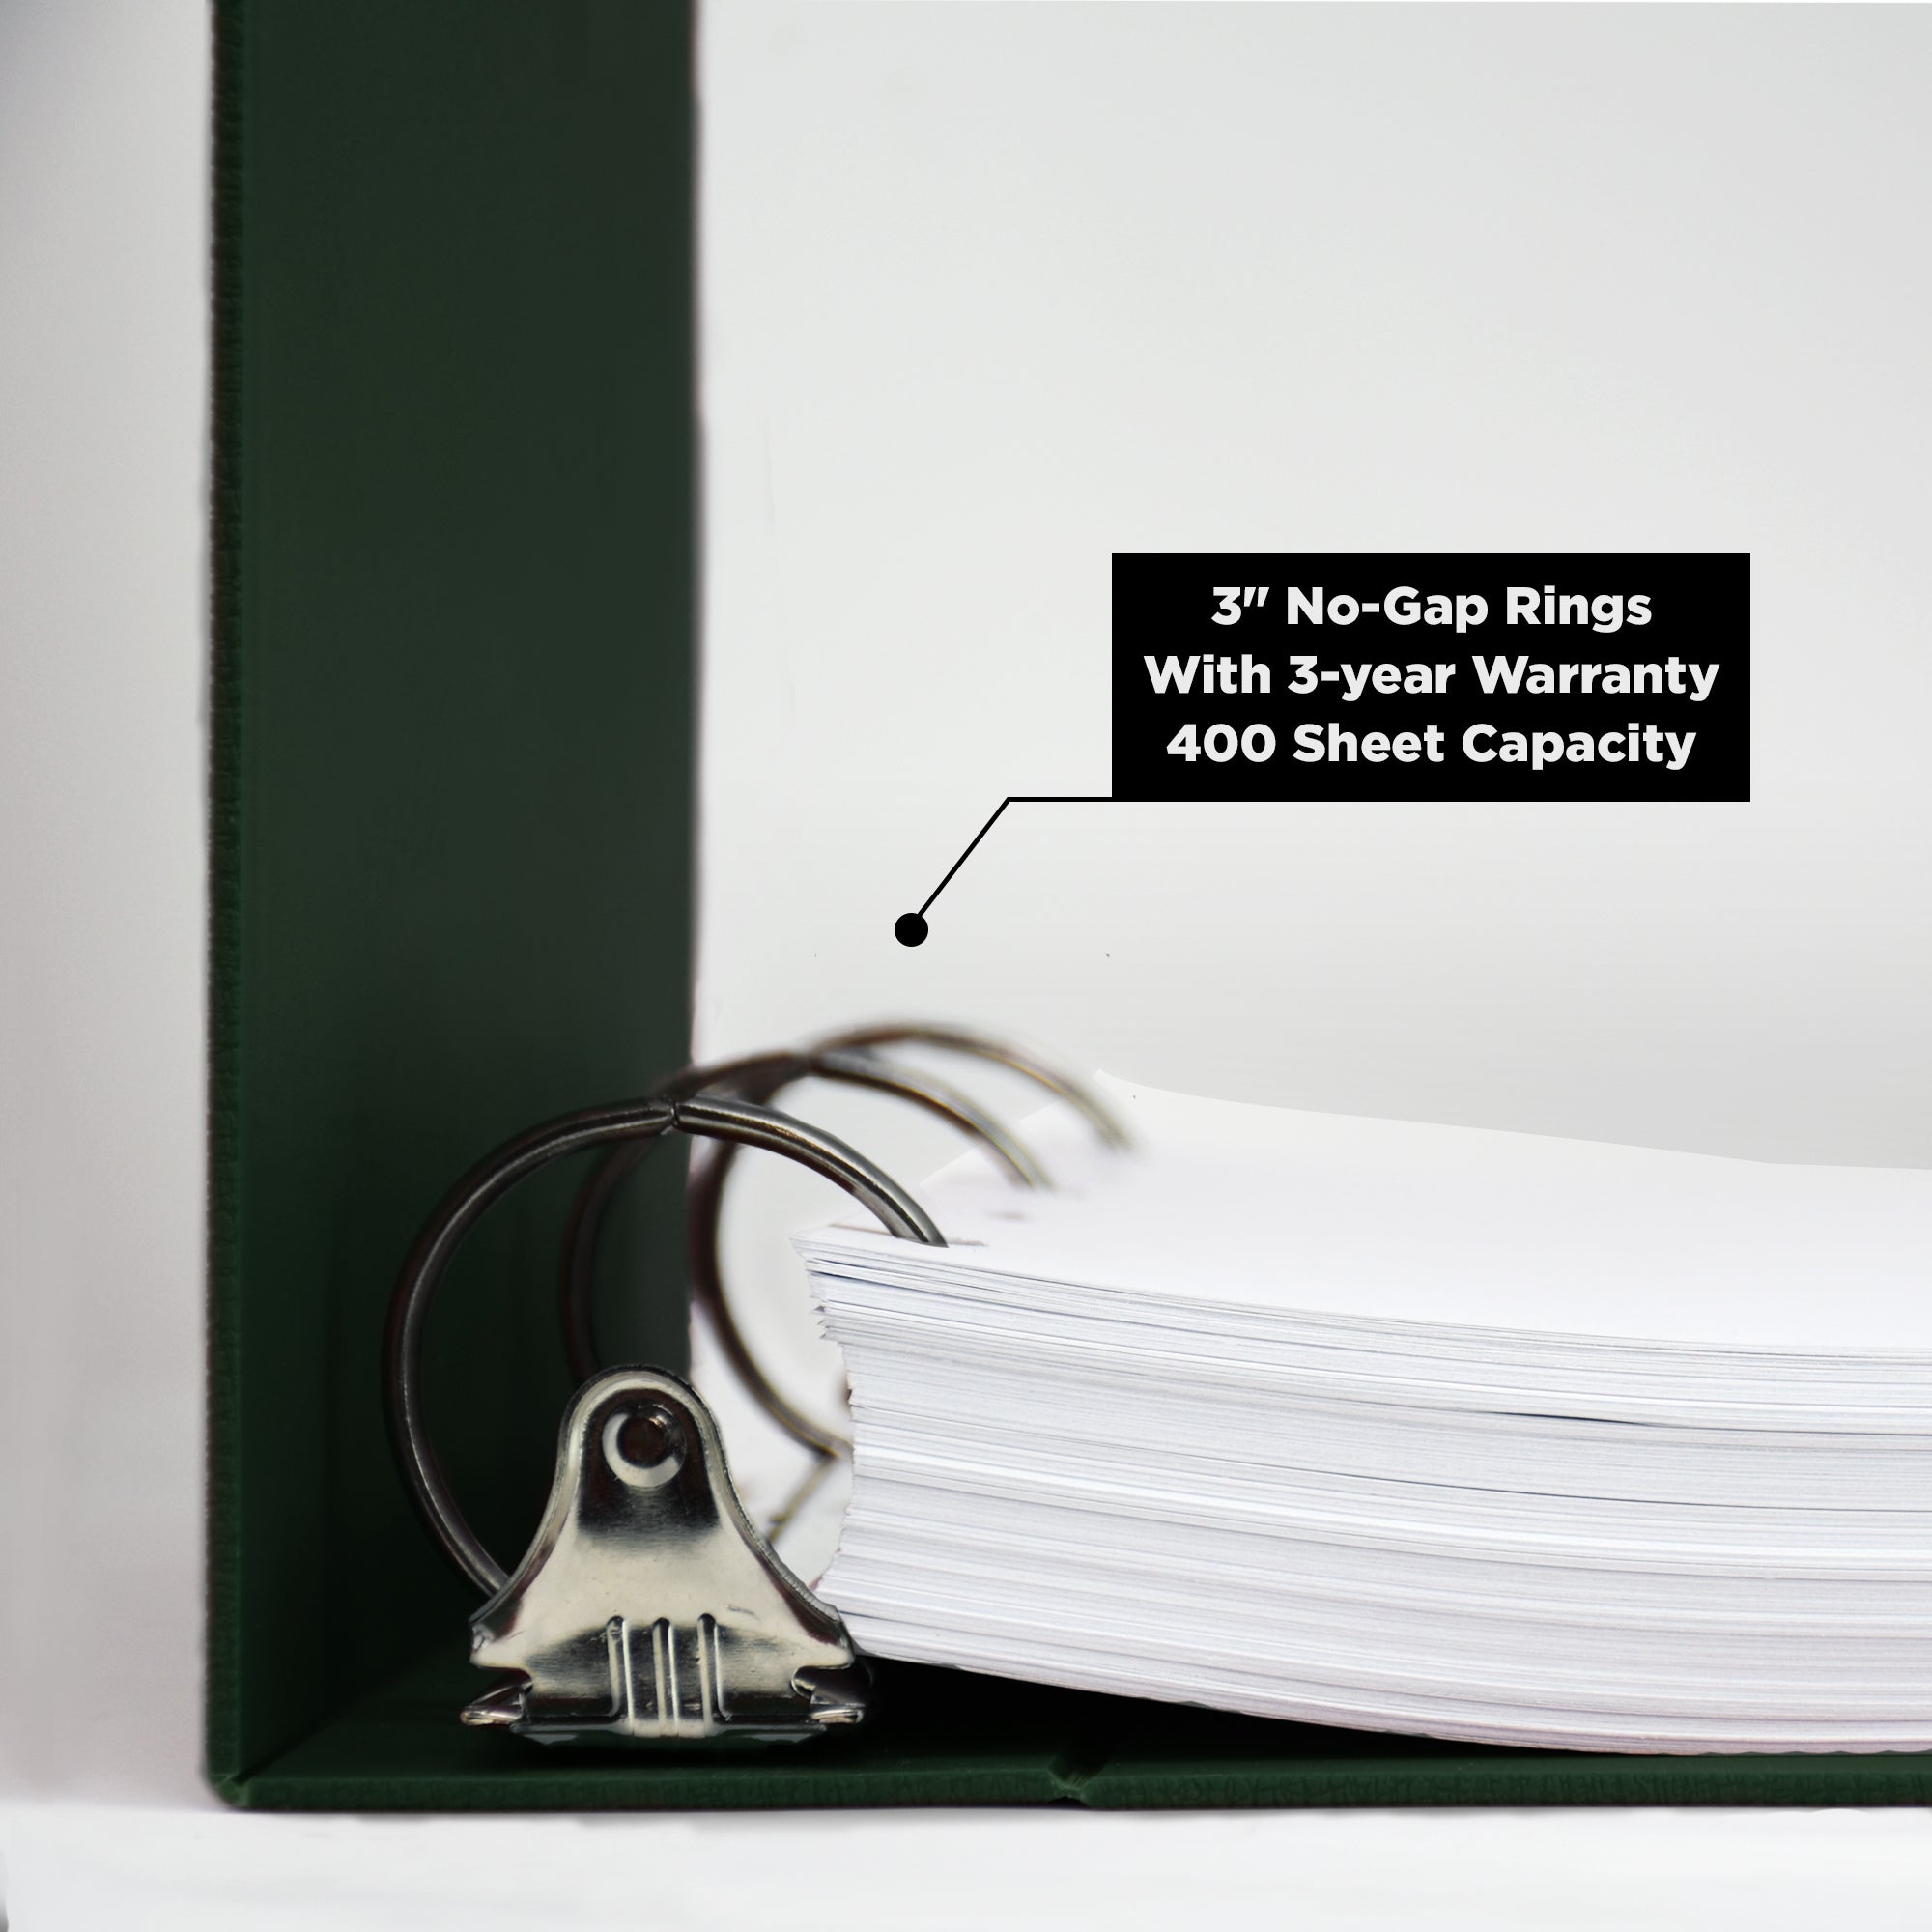 Heavy Duty Ring Binder for Treatment Administration Records (TAR) Manuals – Side Opening